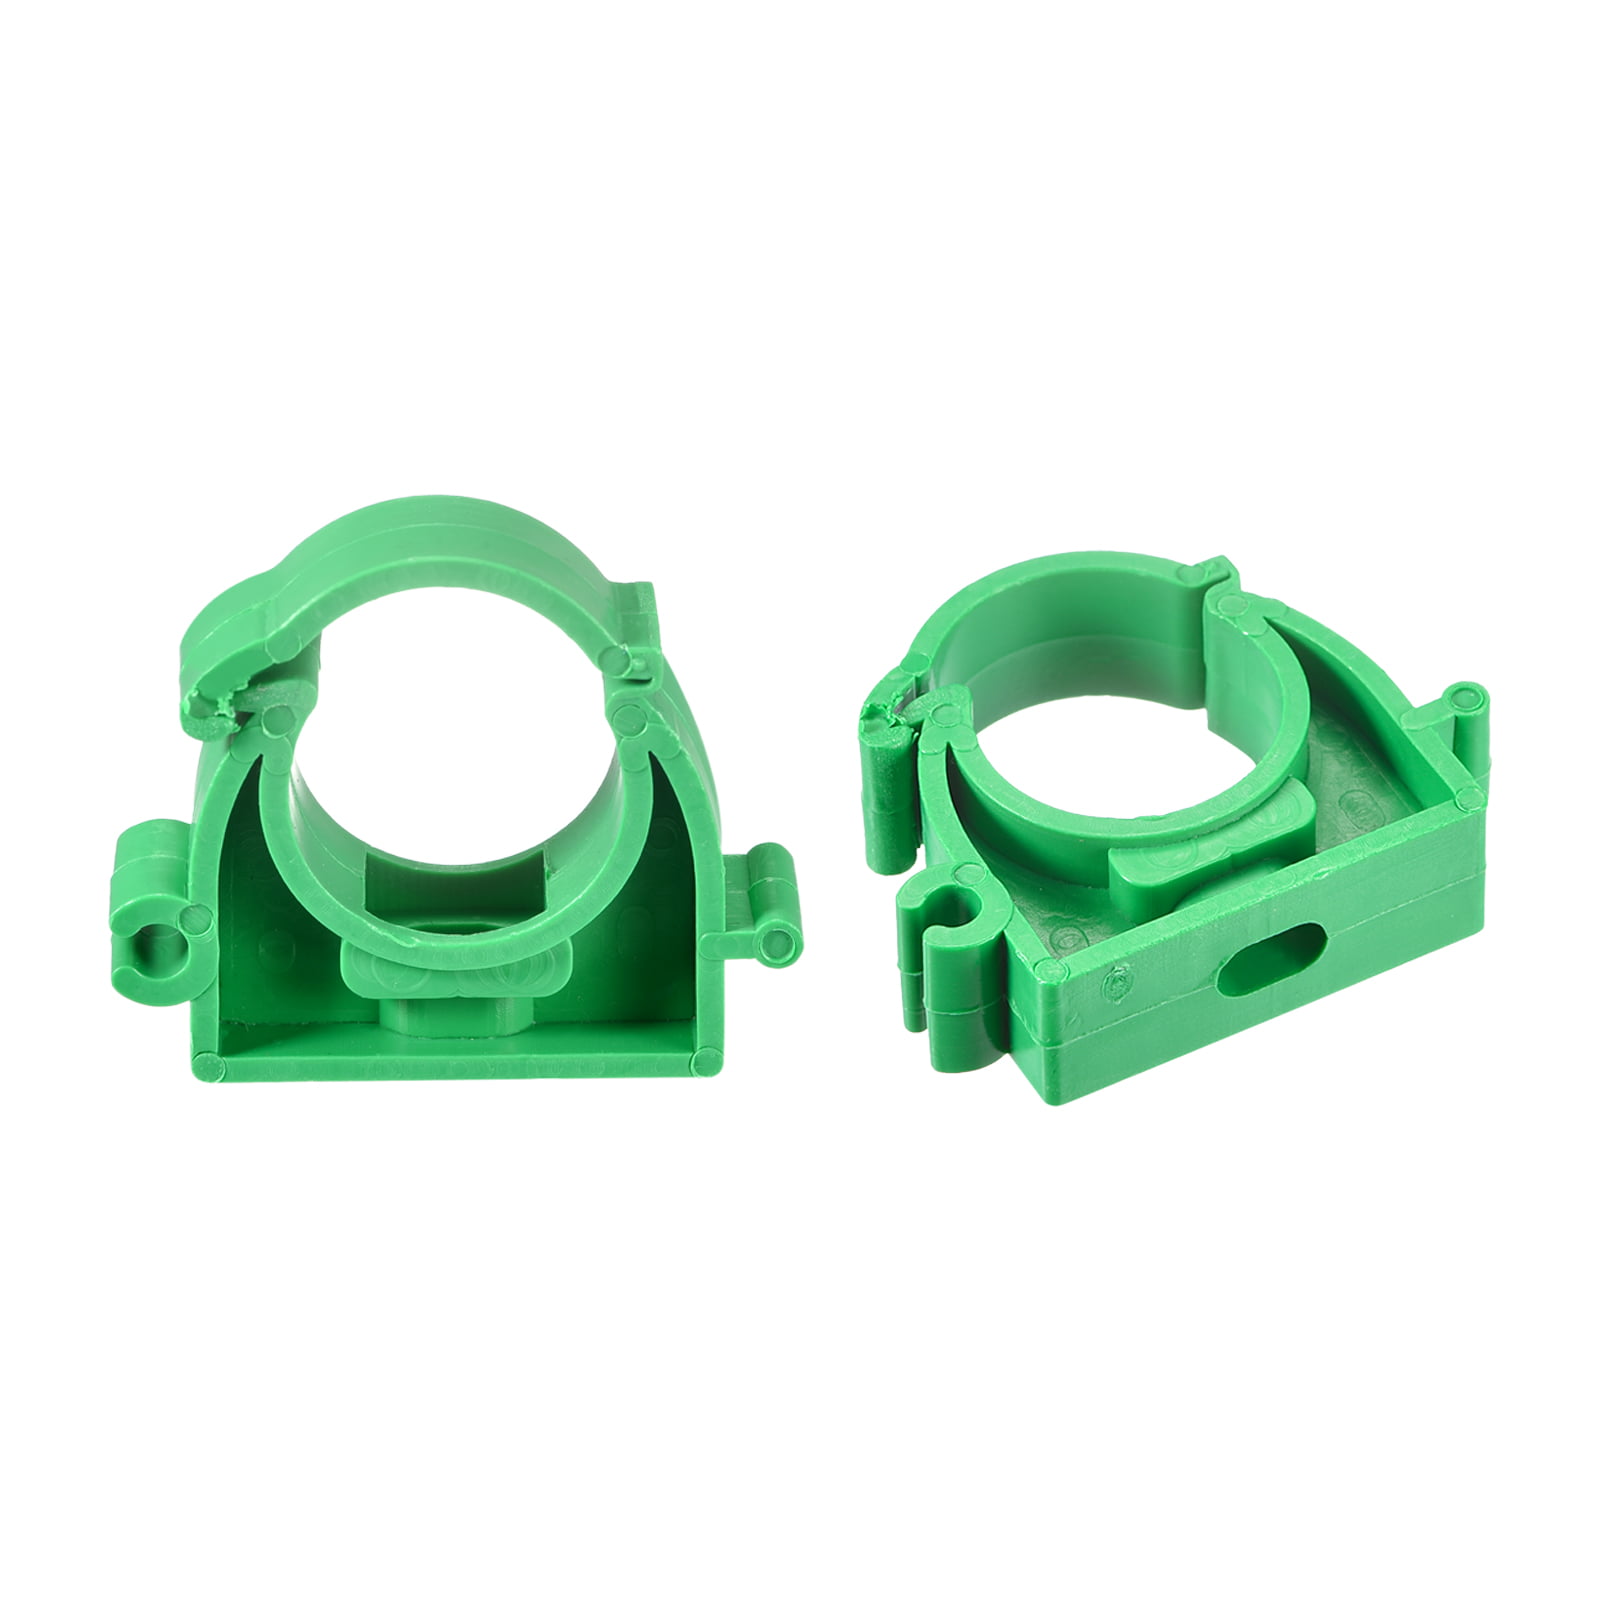 Uxcell 20mm Dia Green PPR Pipe Clamps Clips Hose Fittings with Lock 12Pcs 